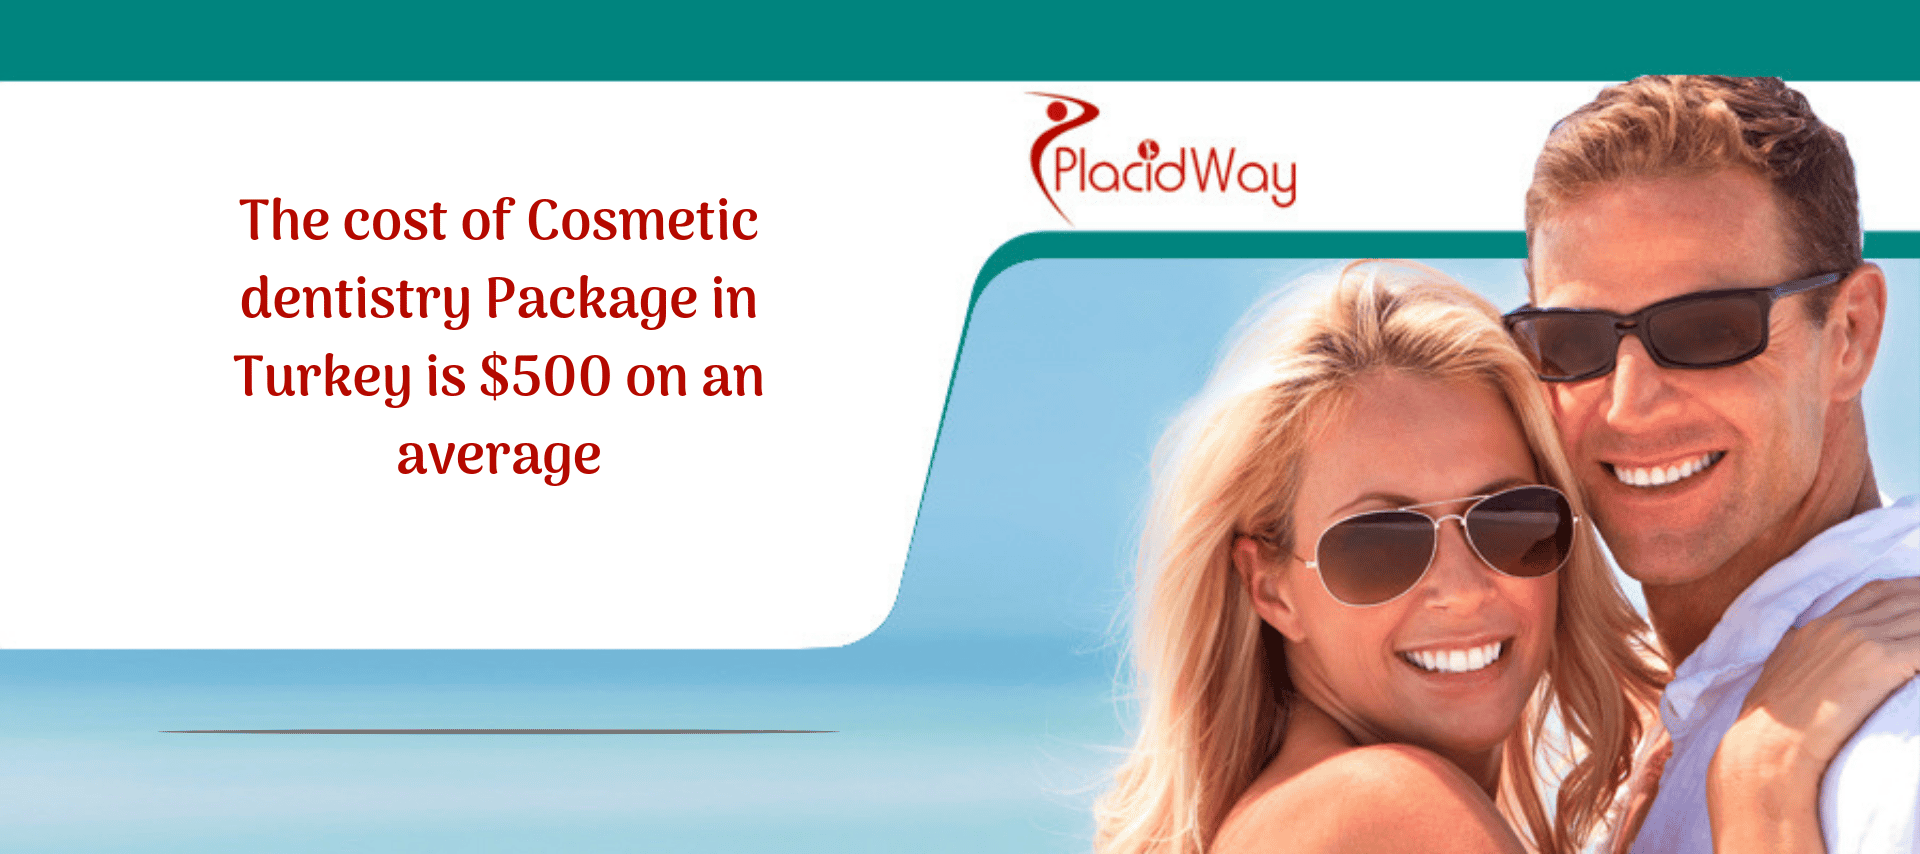 Cost of Cosmetic dentistry Package in Turkey